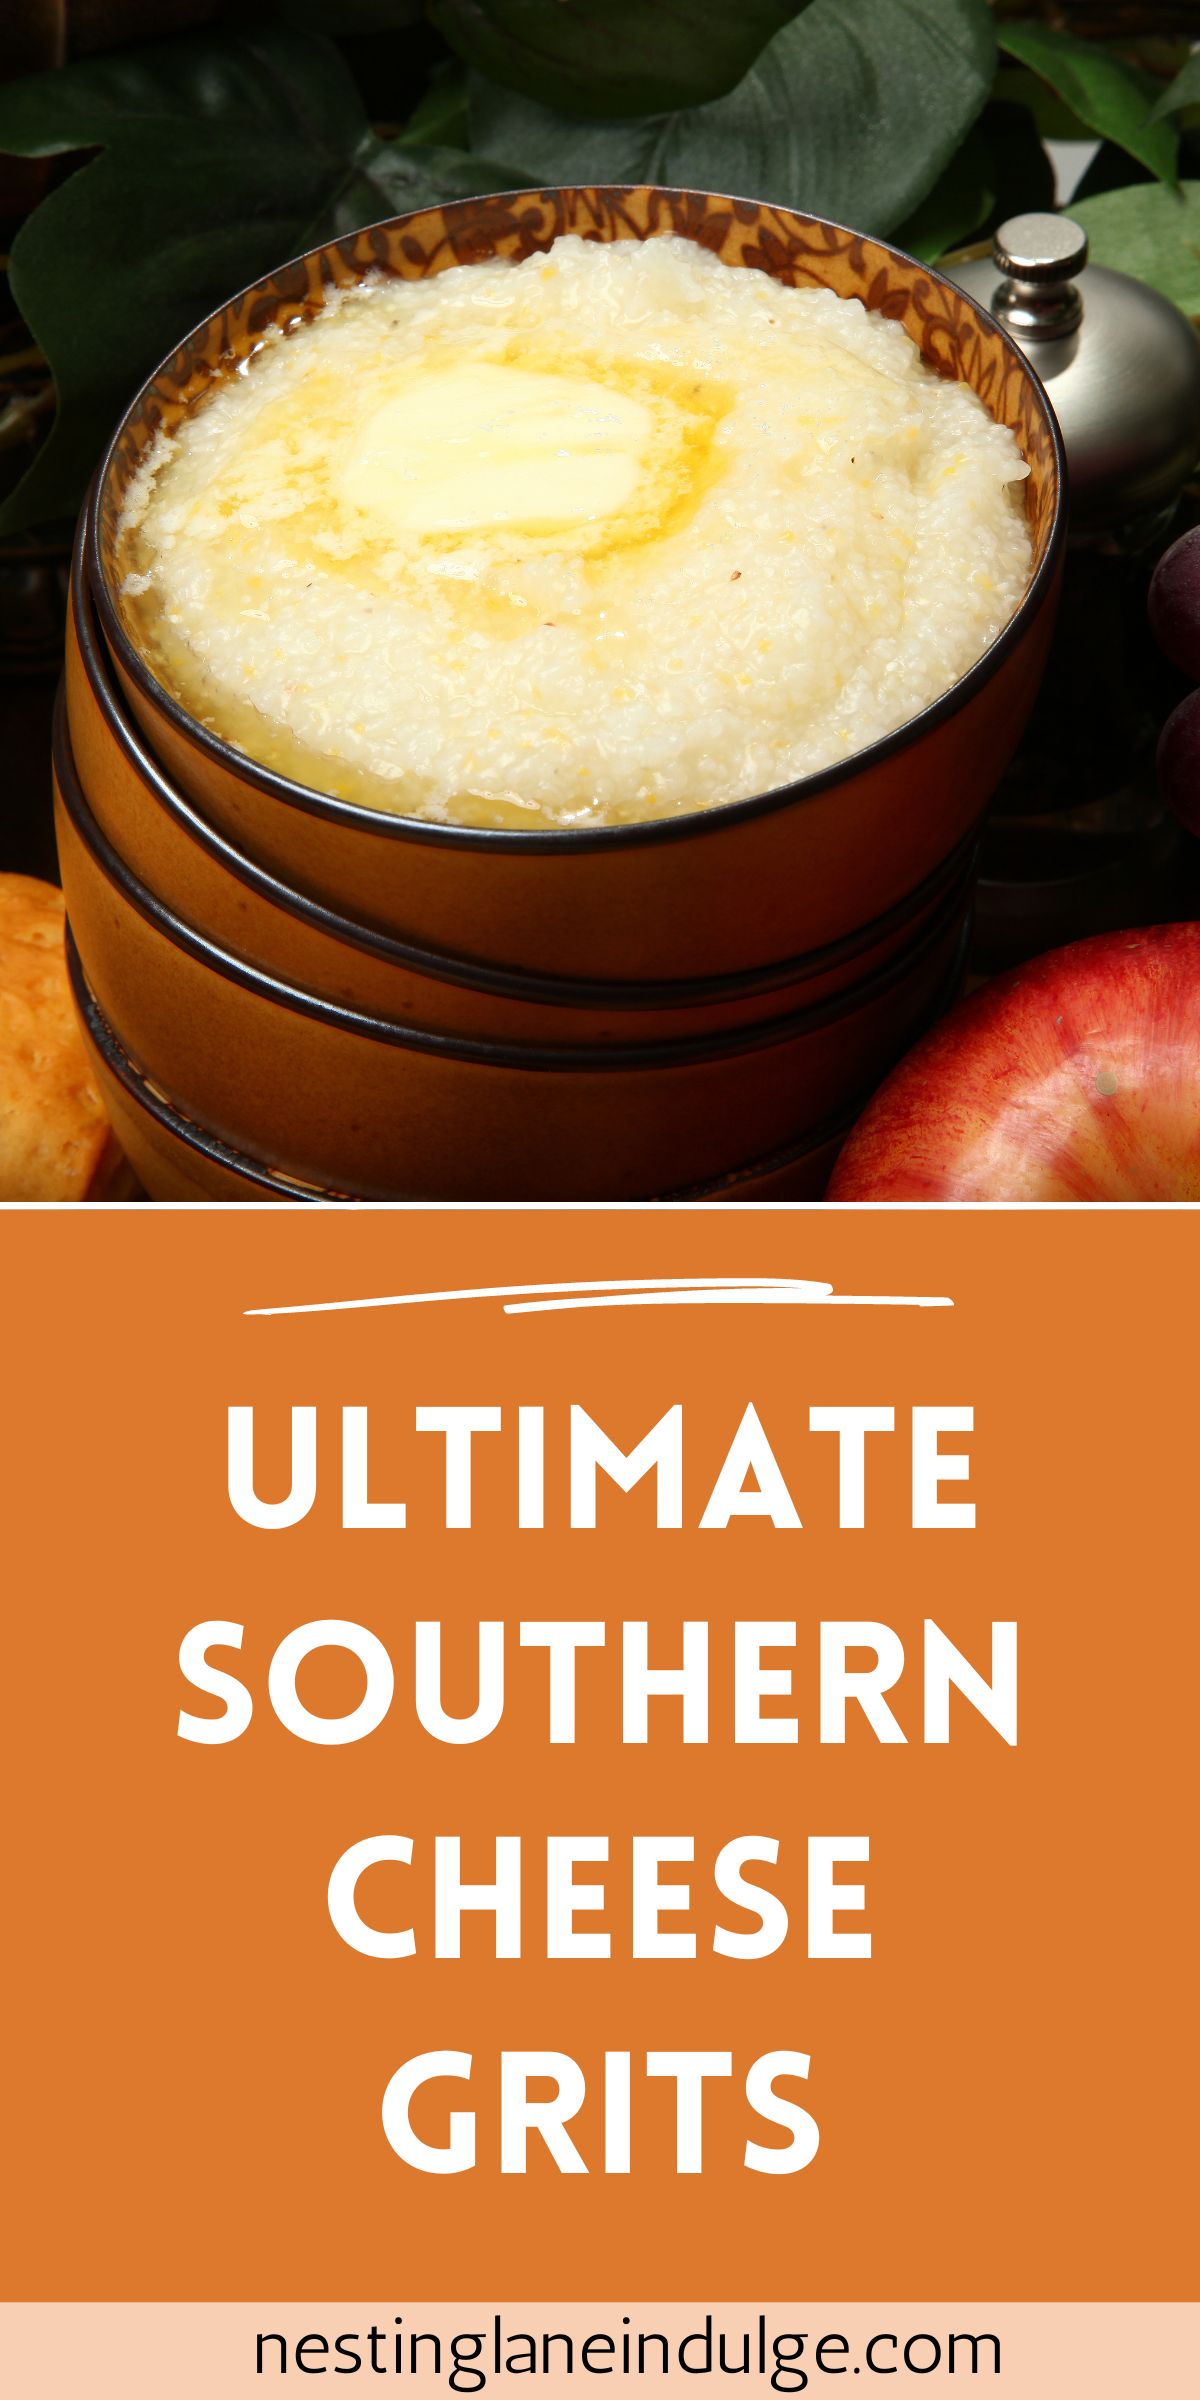 Graphic for Pinterest of Ultimate Southern Cheese Grits Recipe.